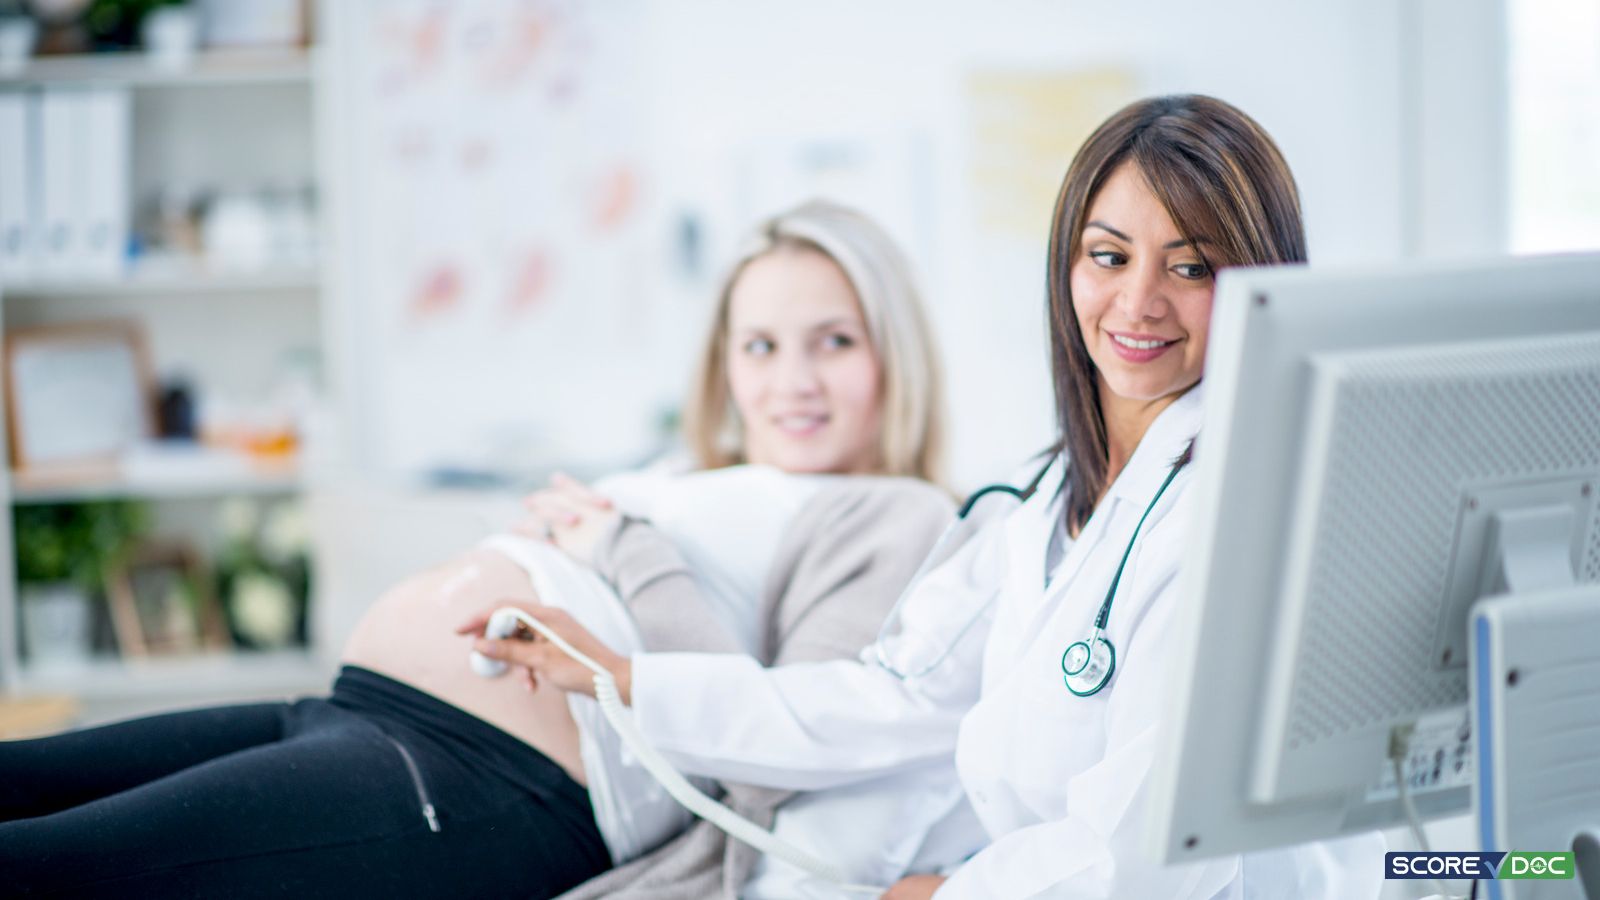 Top-Rated Obstetrician/Gynecology Practices in Las Vegas, NV